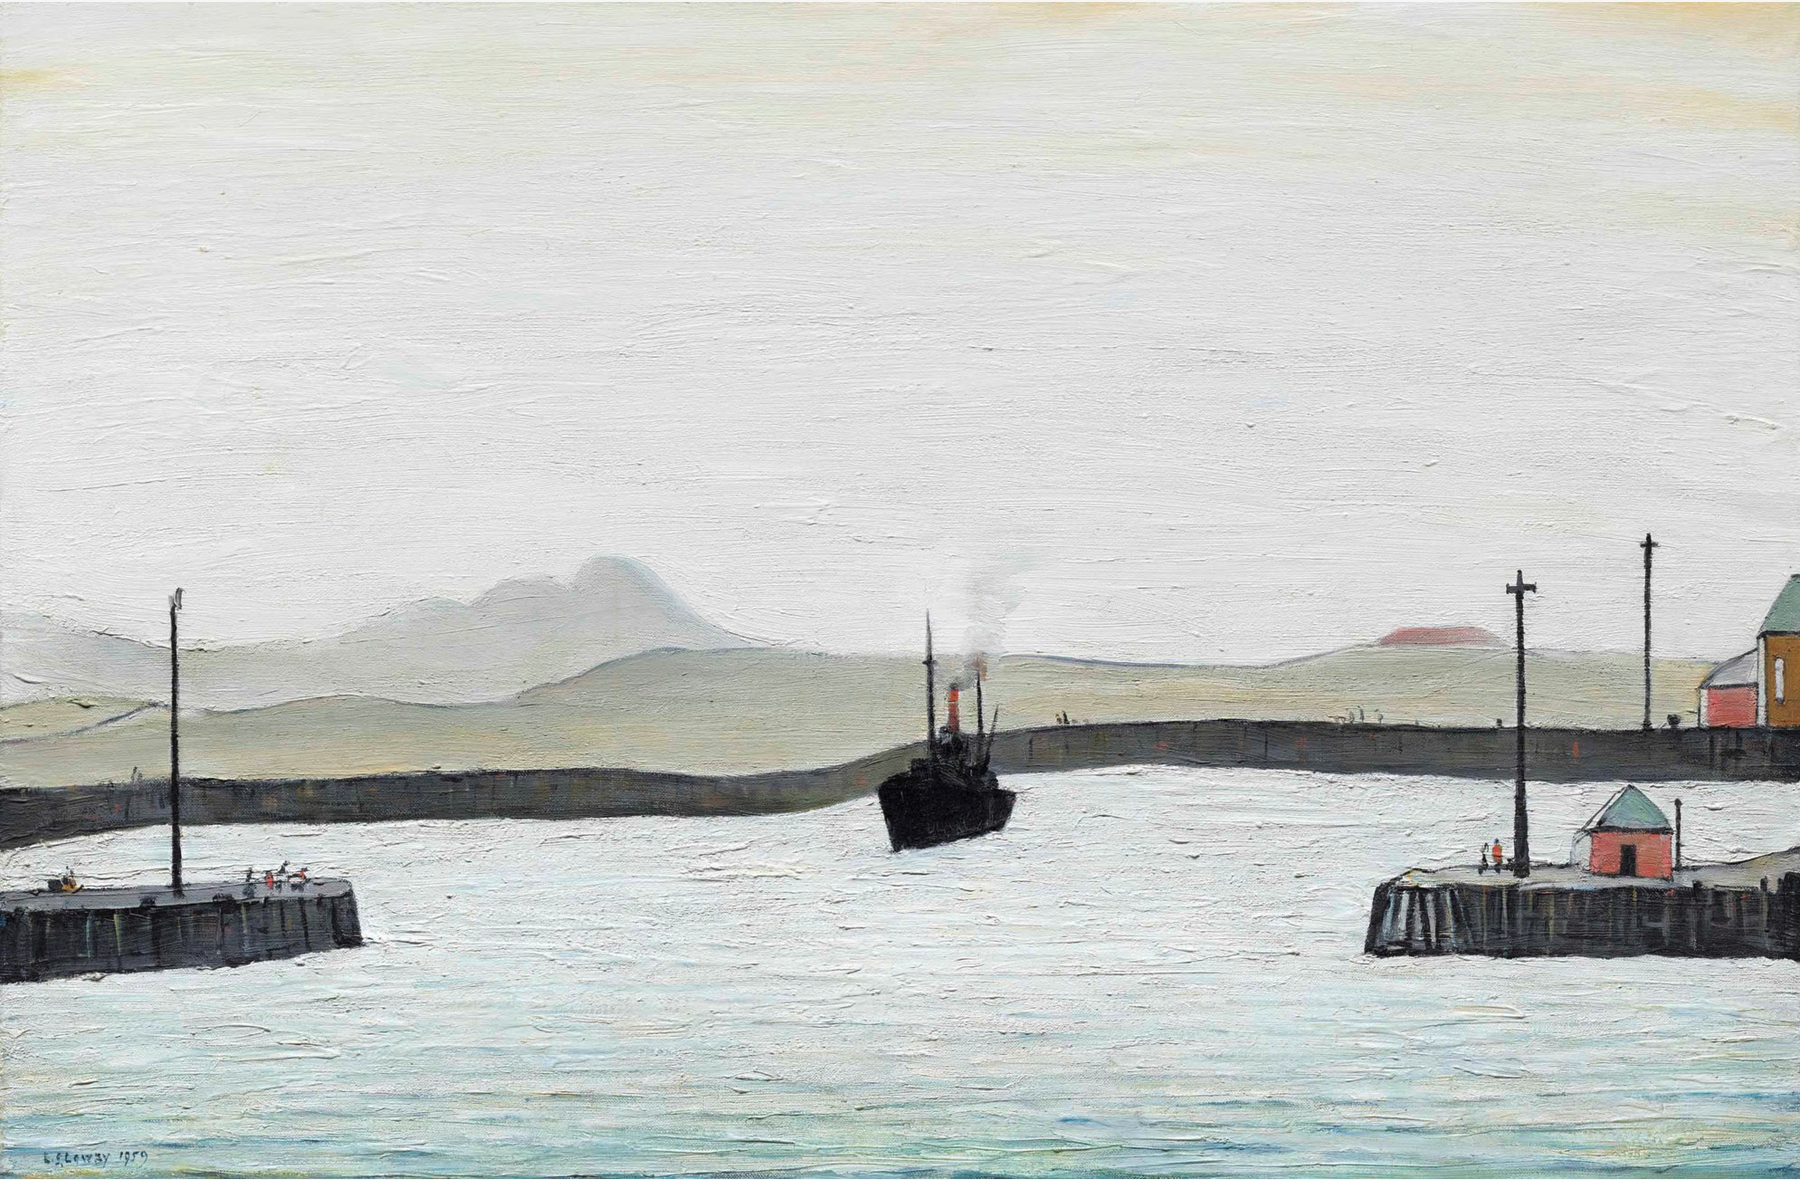 Harbour Scene (1959) by Laurence Stephen Lowry (1887 - 1976), English artist.